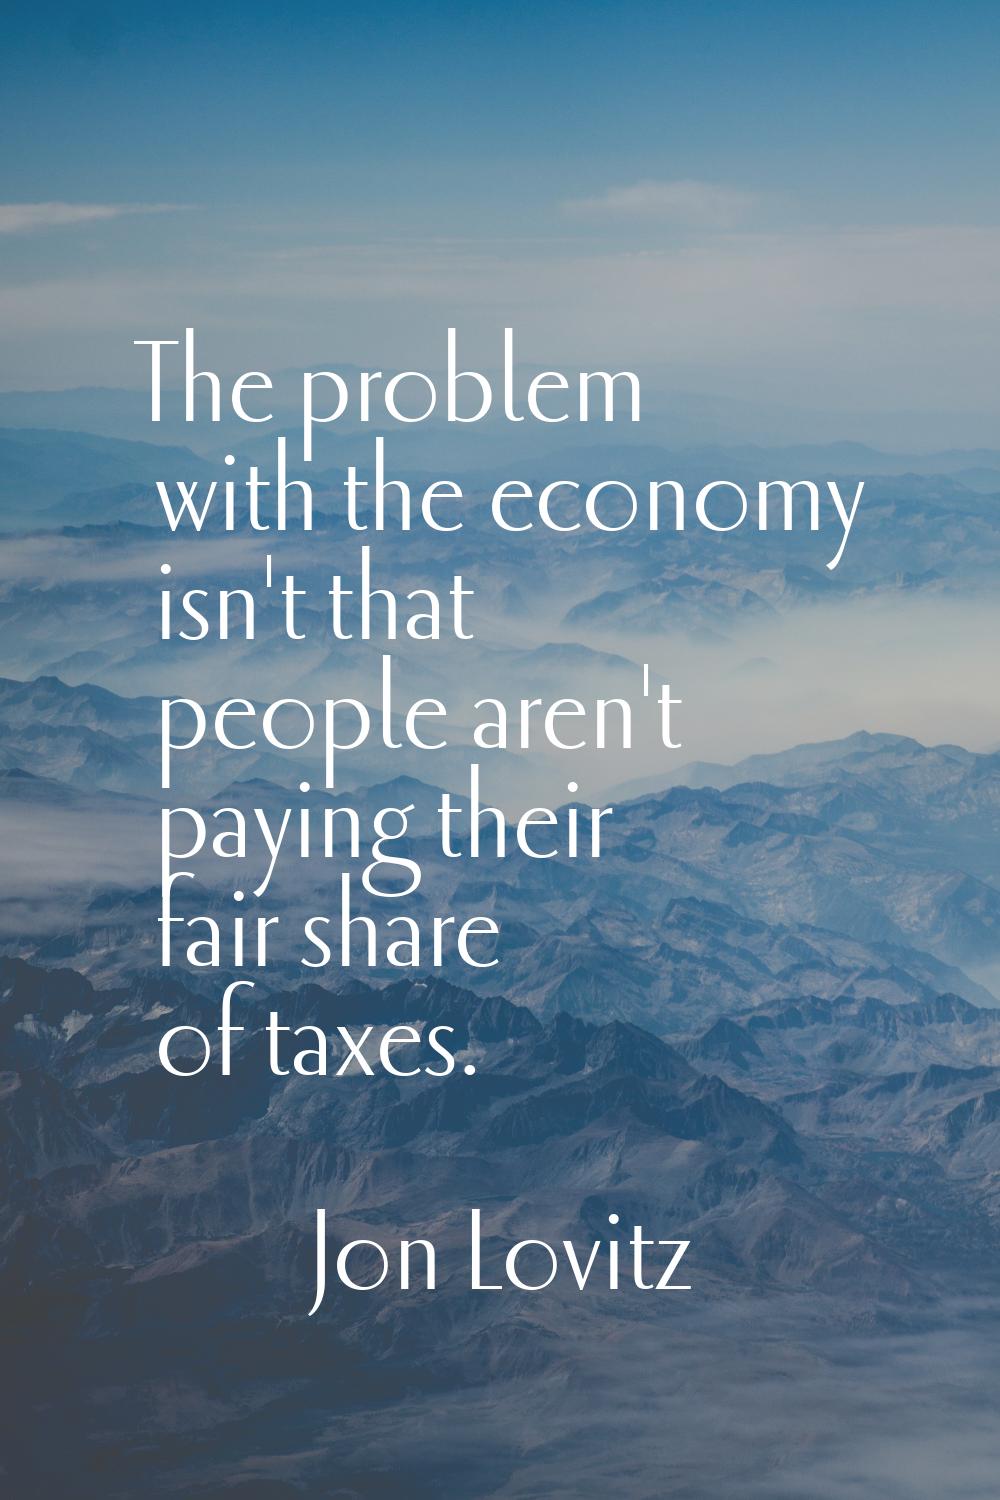 The problem with the economy isn't that people aren't paying their fair share of taxes.